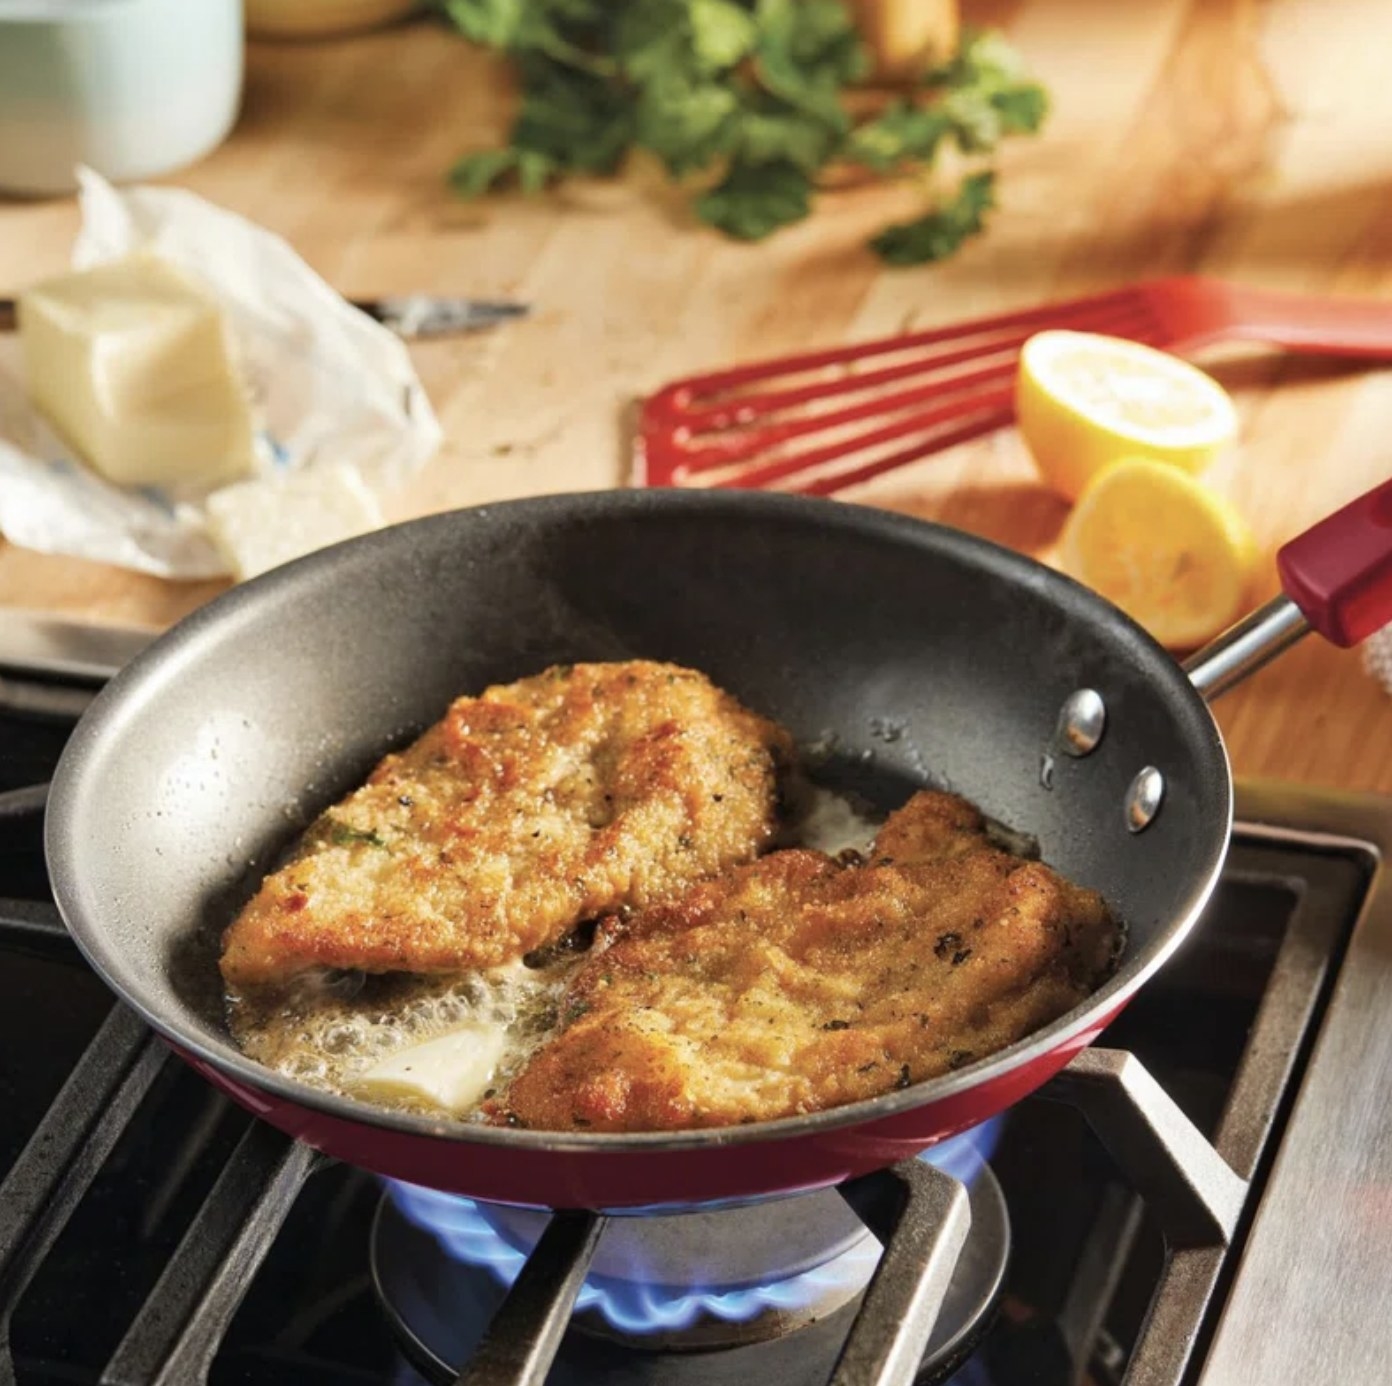 The red fry pan sizzling up breaded meat cutlets in butter